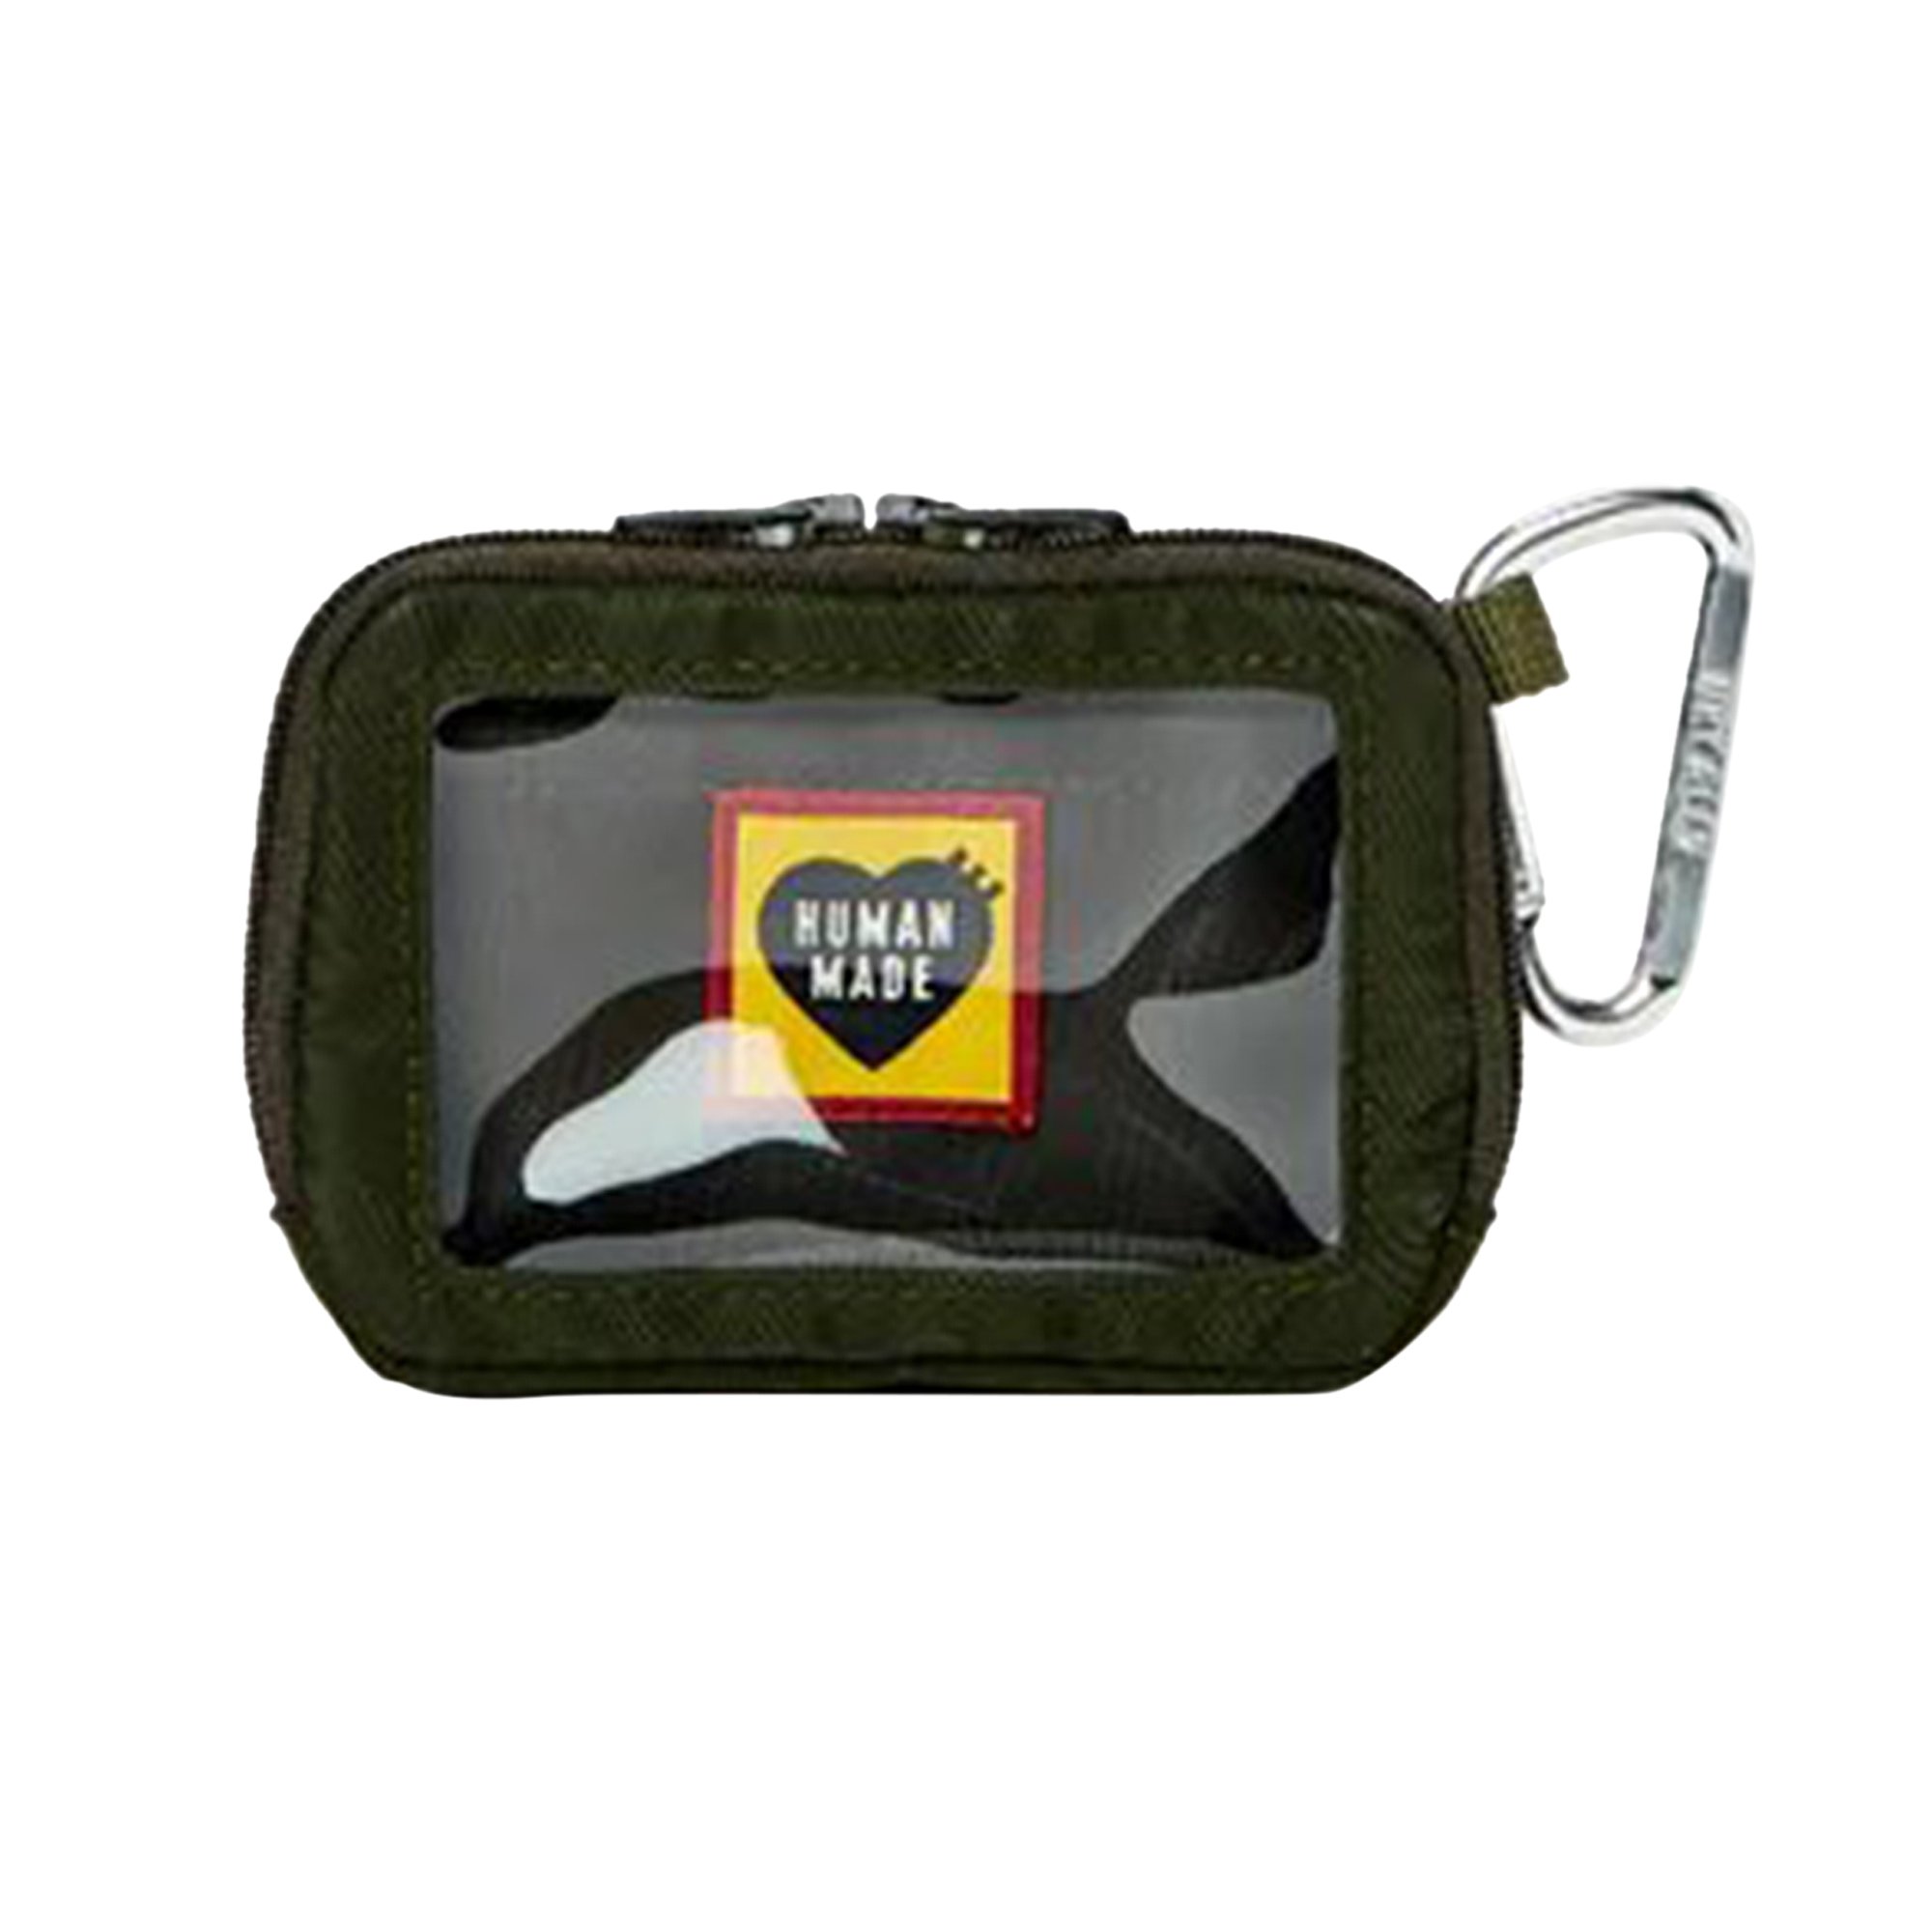 Buy Human Made Military Card Case 'Olive Drab' - HM25GD027 OLIV | GOAT